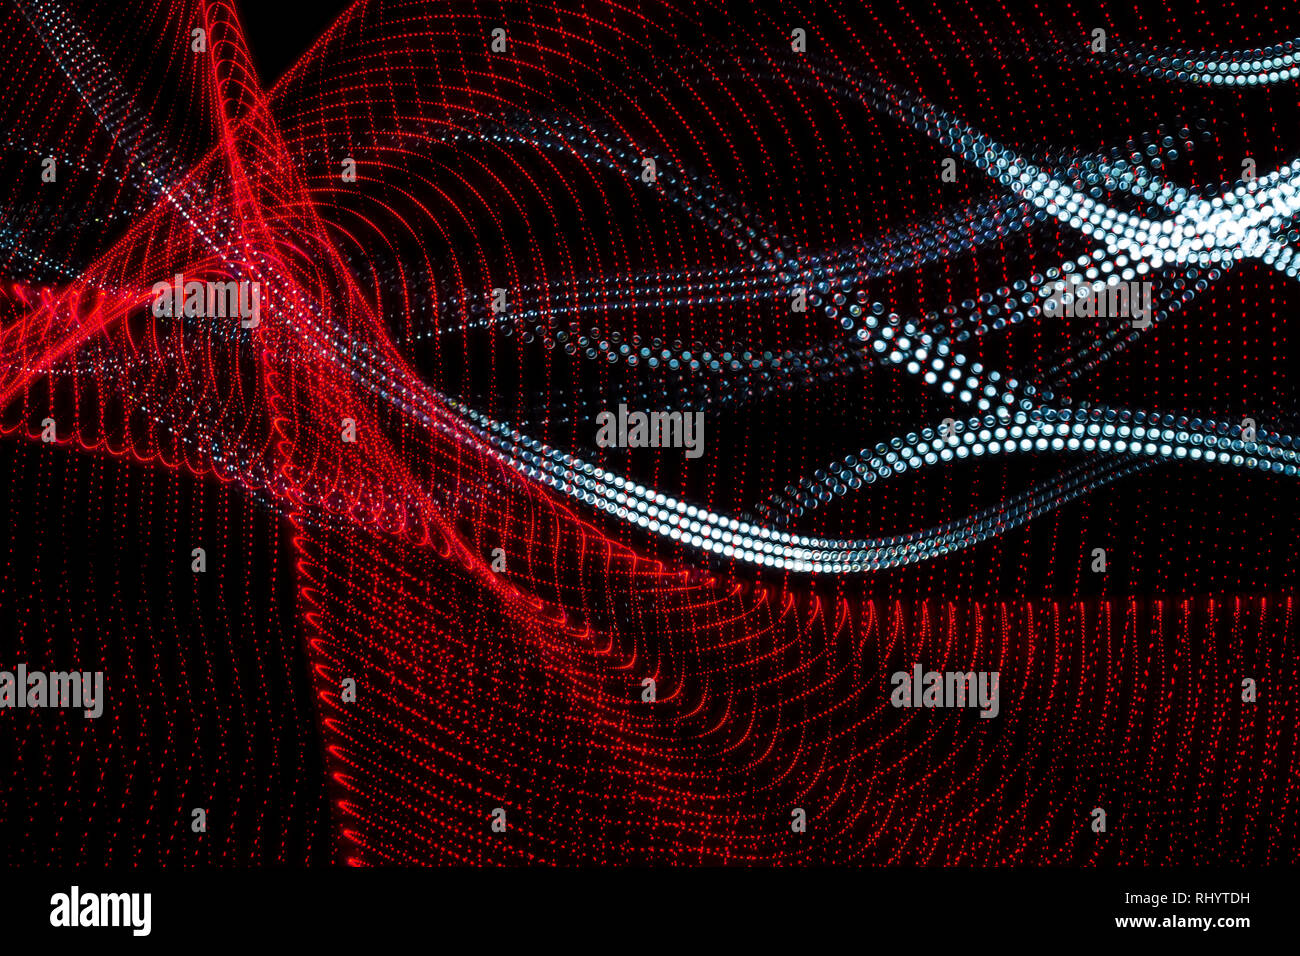 Colorful and abstract lines curved shapes on black background. Abstract light painting. Stock Photo